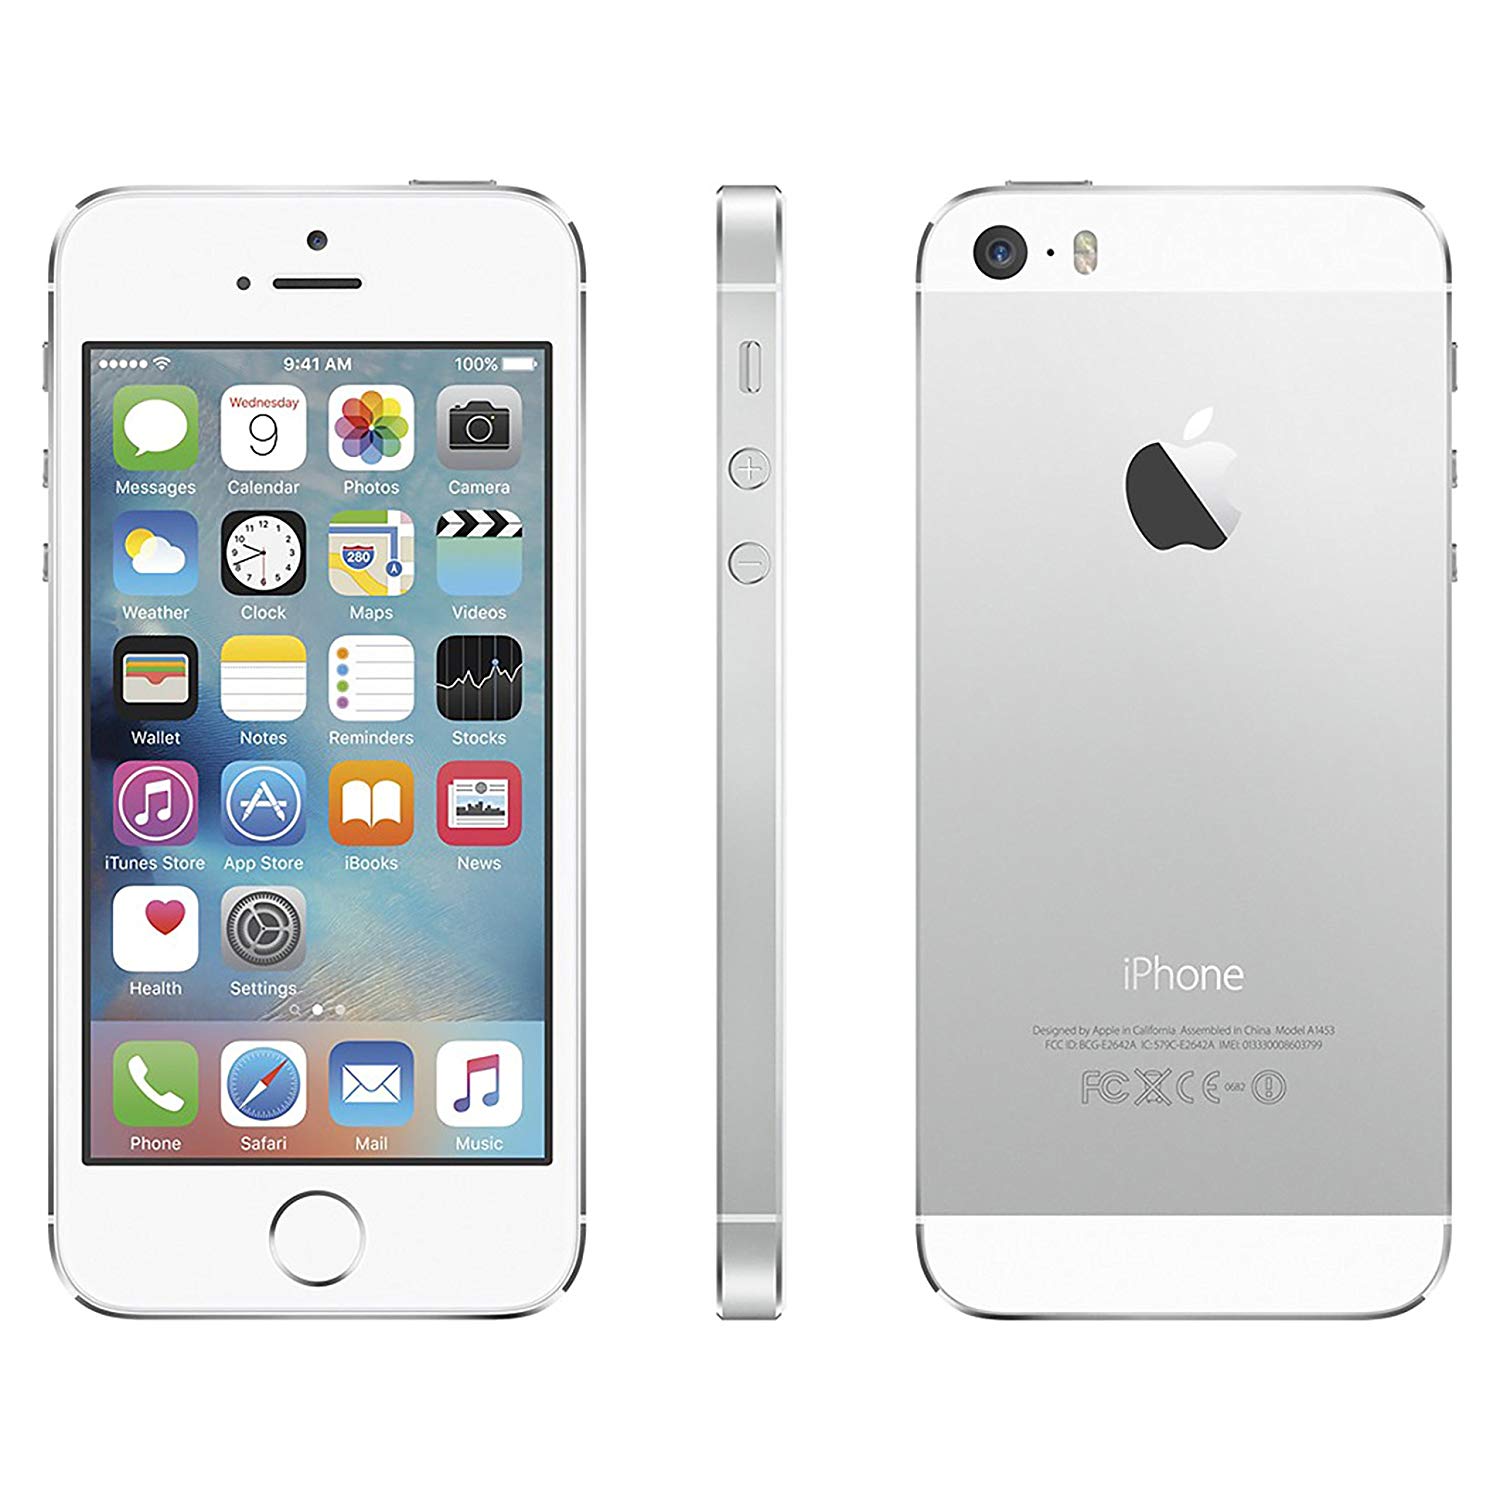 IPhone 5S | Apple Products Wiki | Fandom